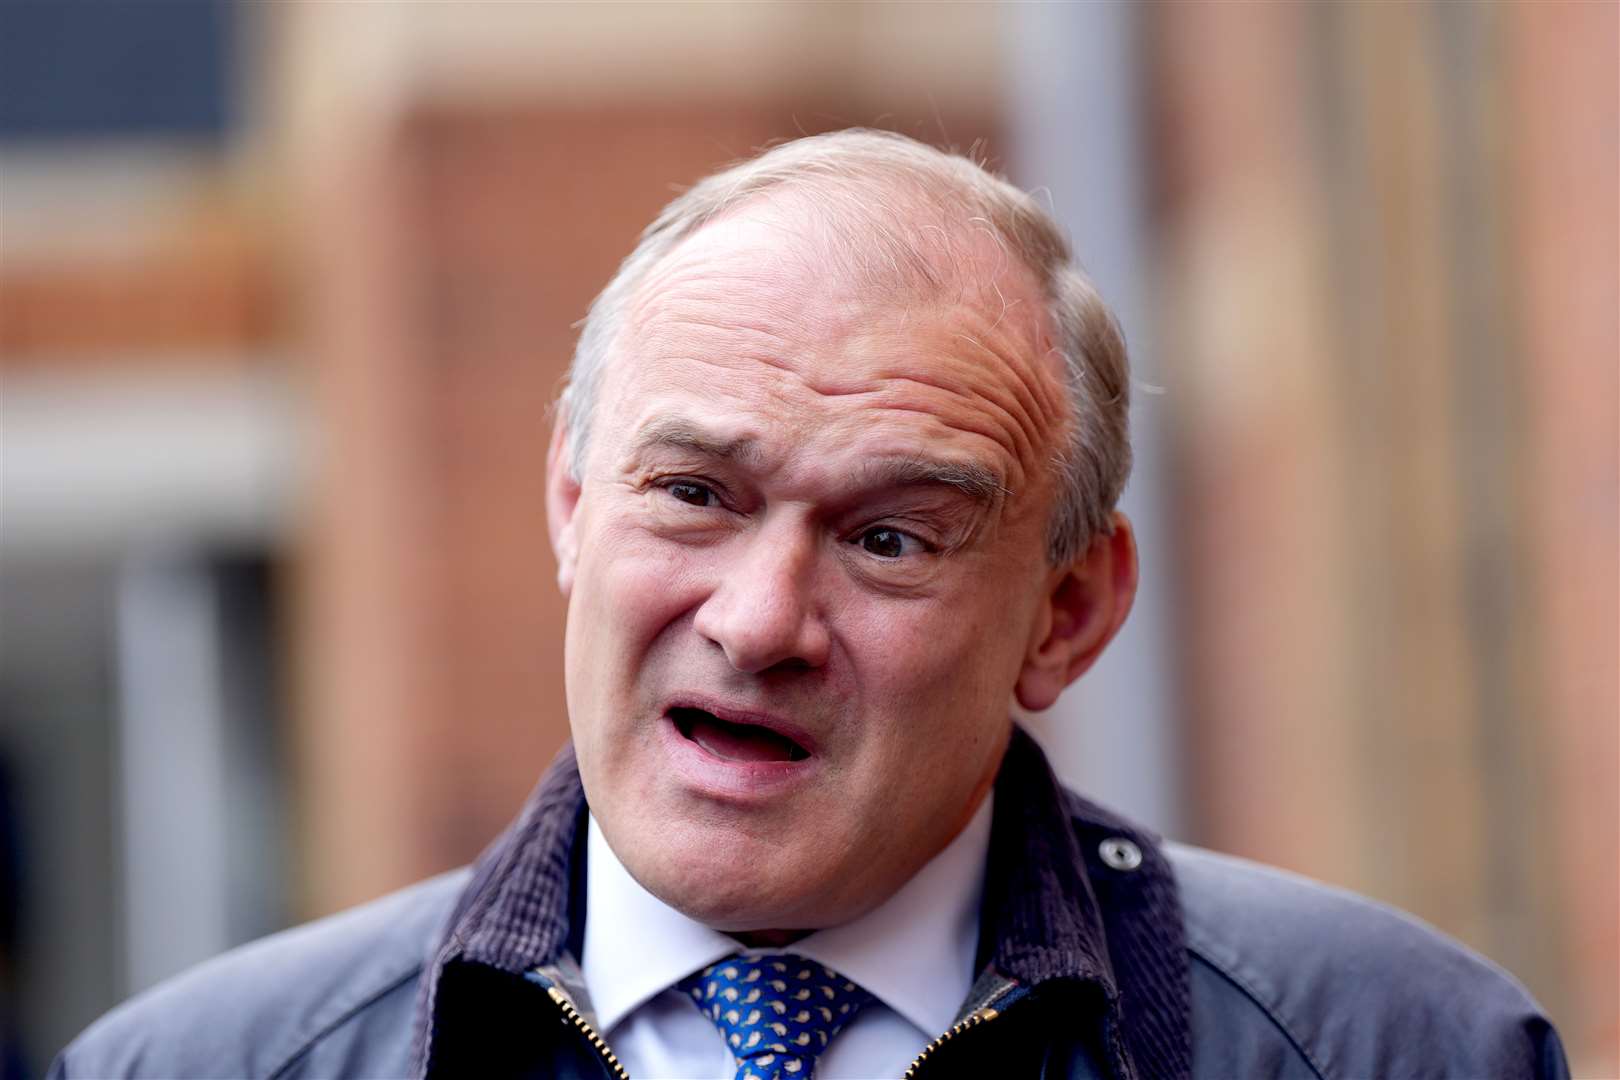 Liberal Democrat leader Sir Ed Davey said the Conservative Government was ‘out of touch’ and urged the Prime Minister to call a general election (Yui Mok/PA)